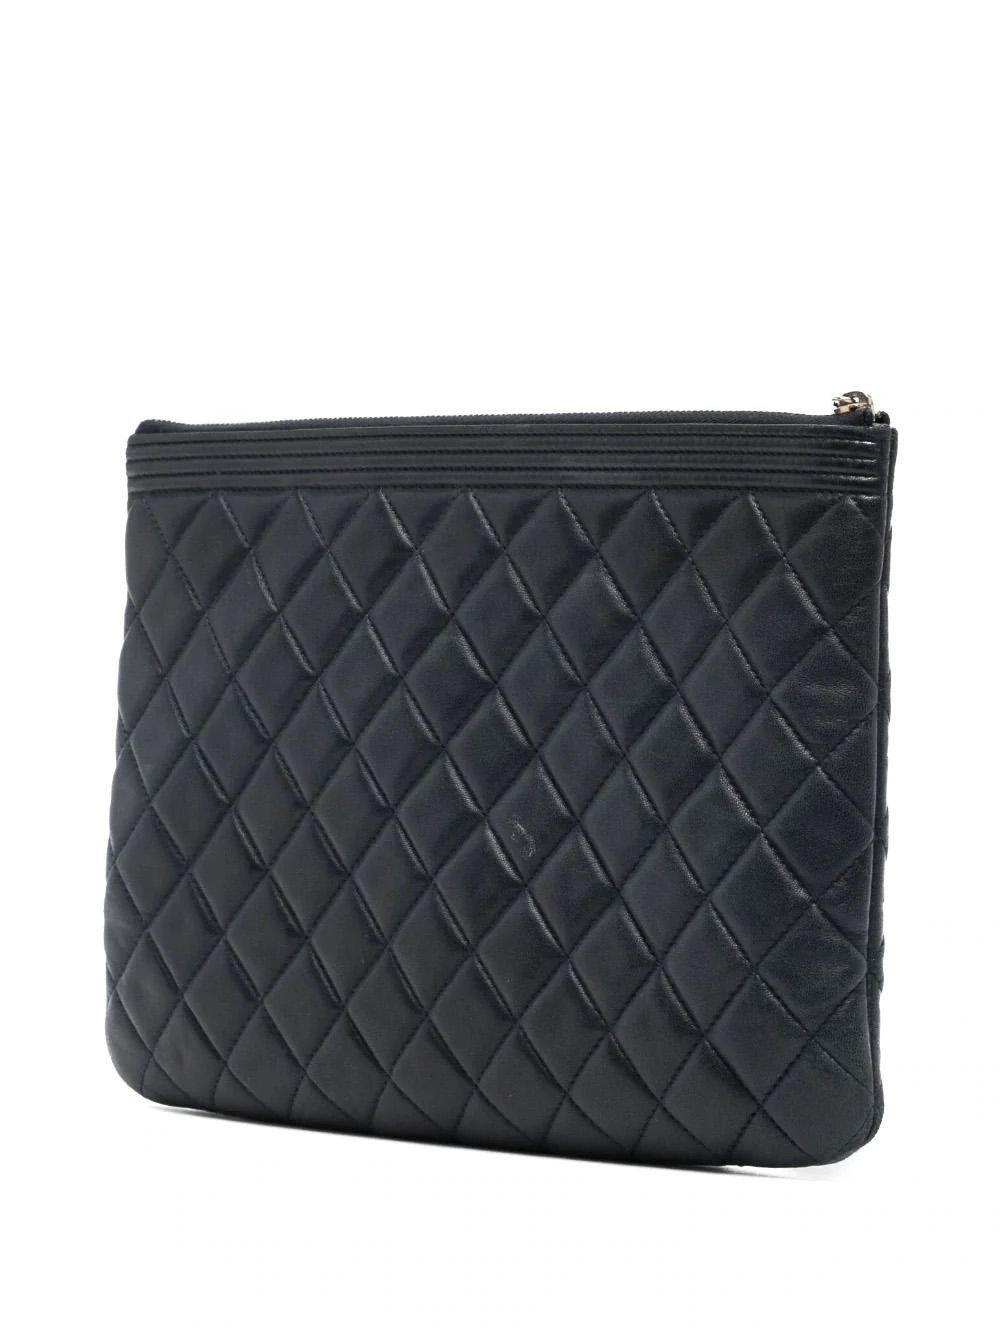 This Chanel Boy clutch bag is composed of dark blue leather in a diamond quilted pattern with a signature Boy push-lock motif and gold-tone hardware. It features a top zip fastening which leads to a main compartment. Luxurious, timeless, and